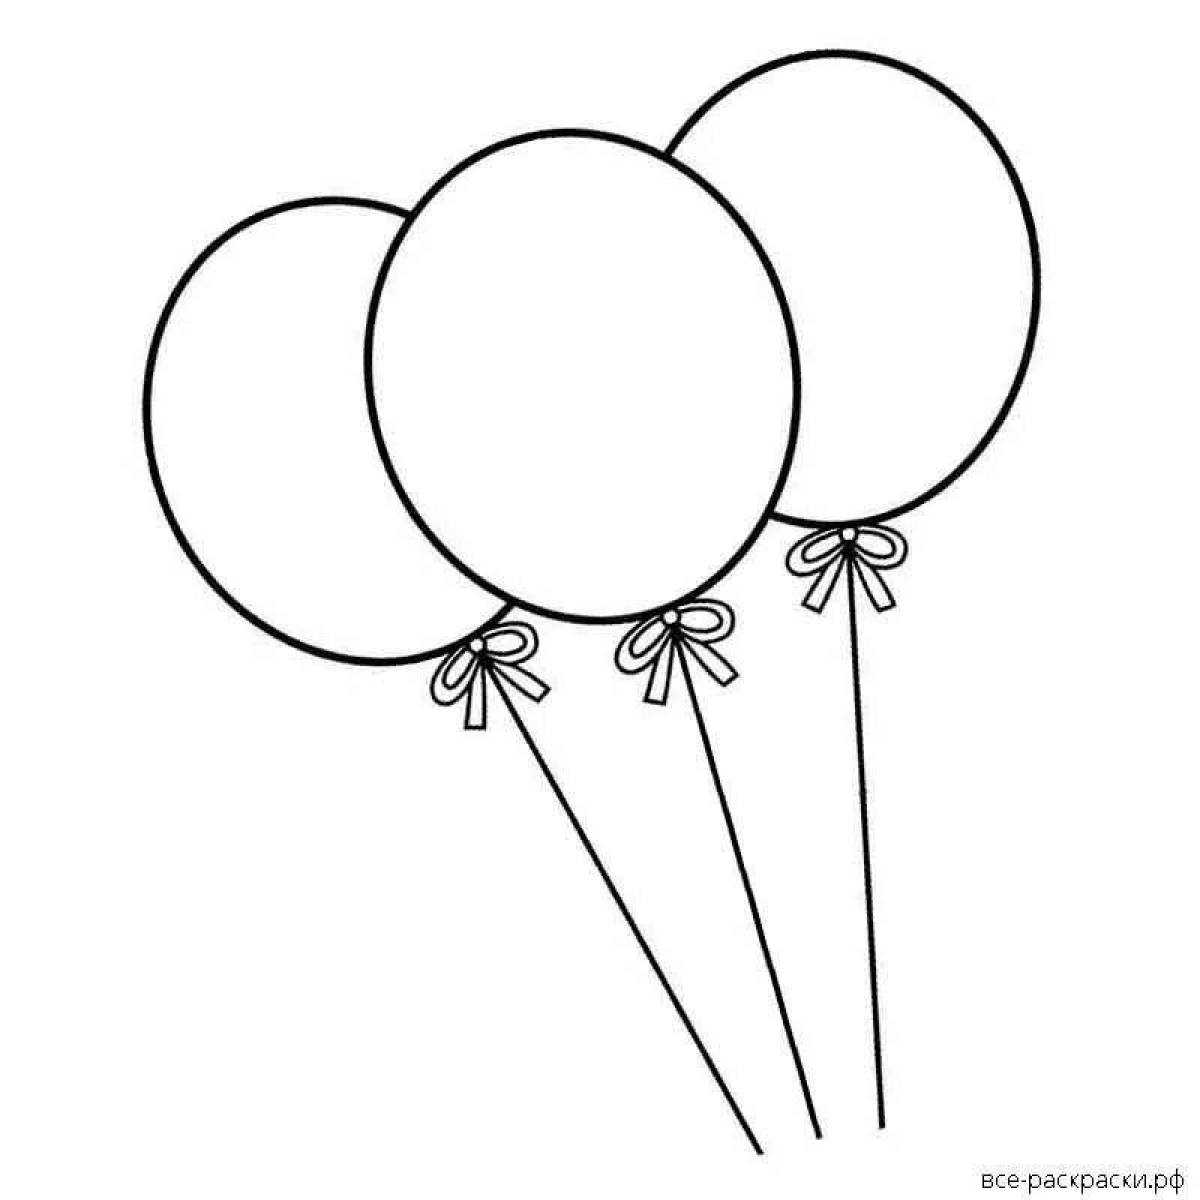 Coloring page dazzling hot air balloon